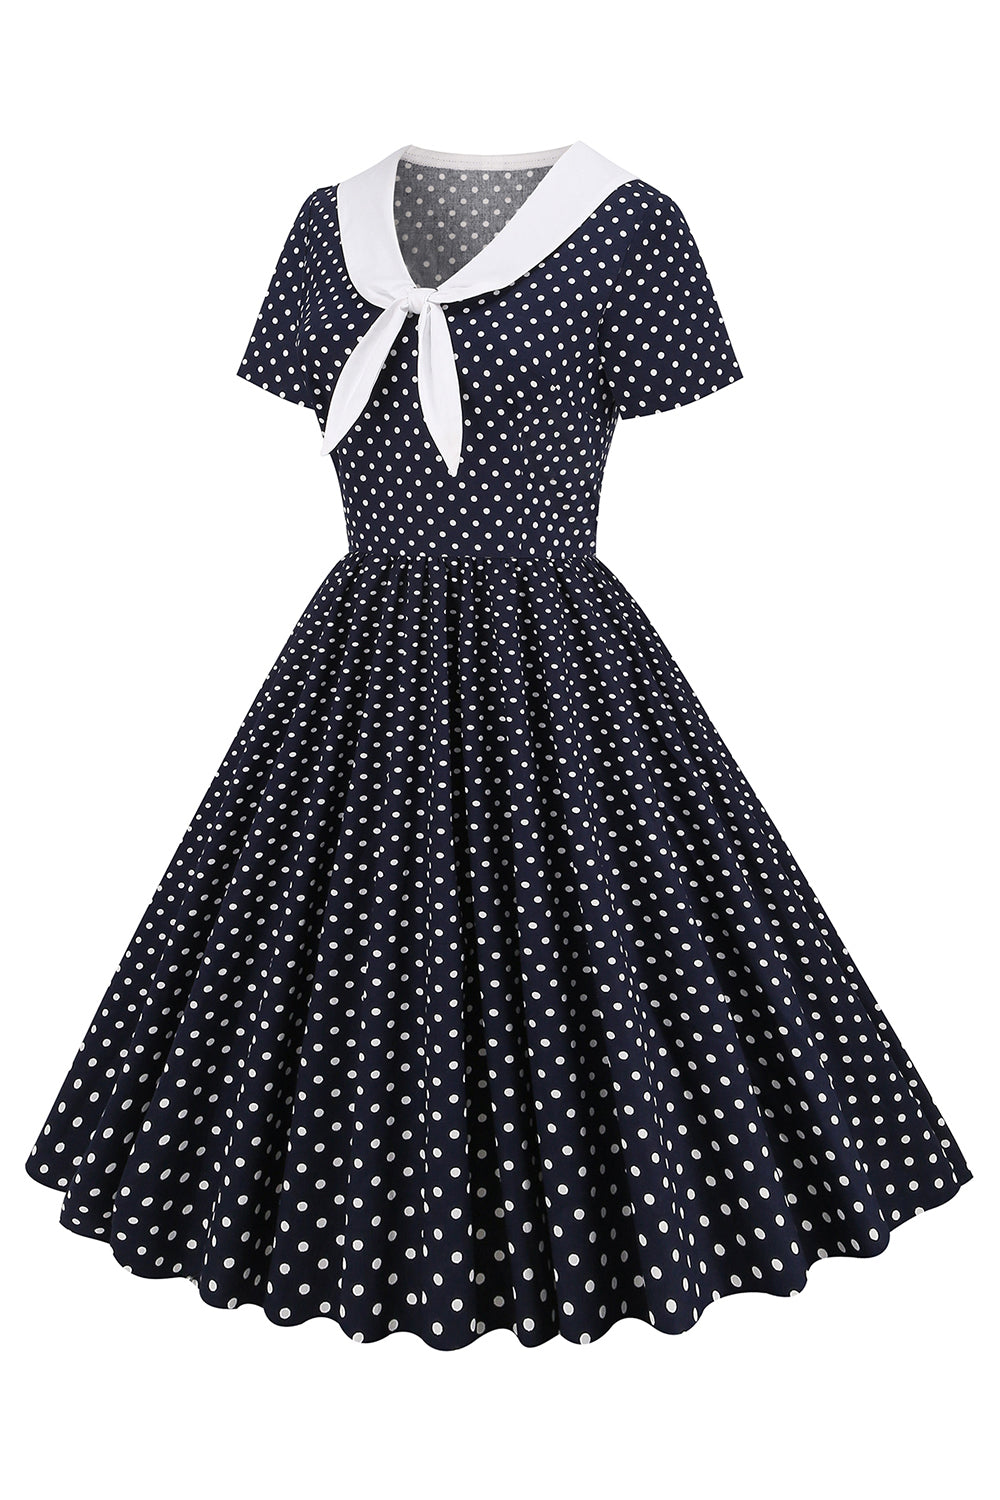 Black and White Polka Dots Vintage 1950s Dress with Bowknot